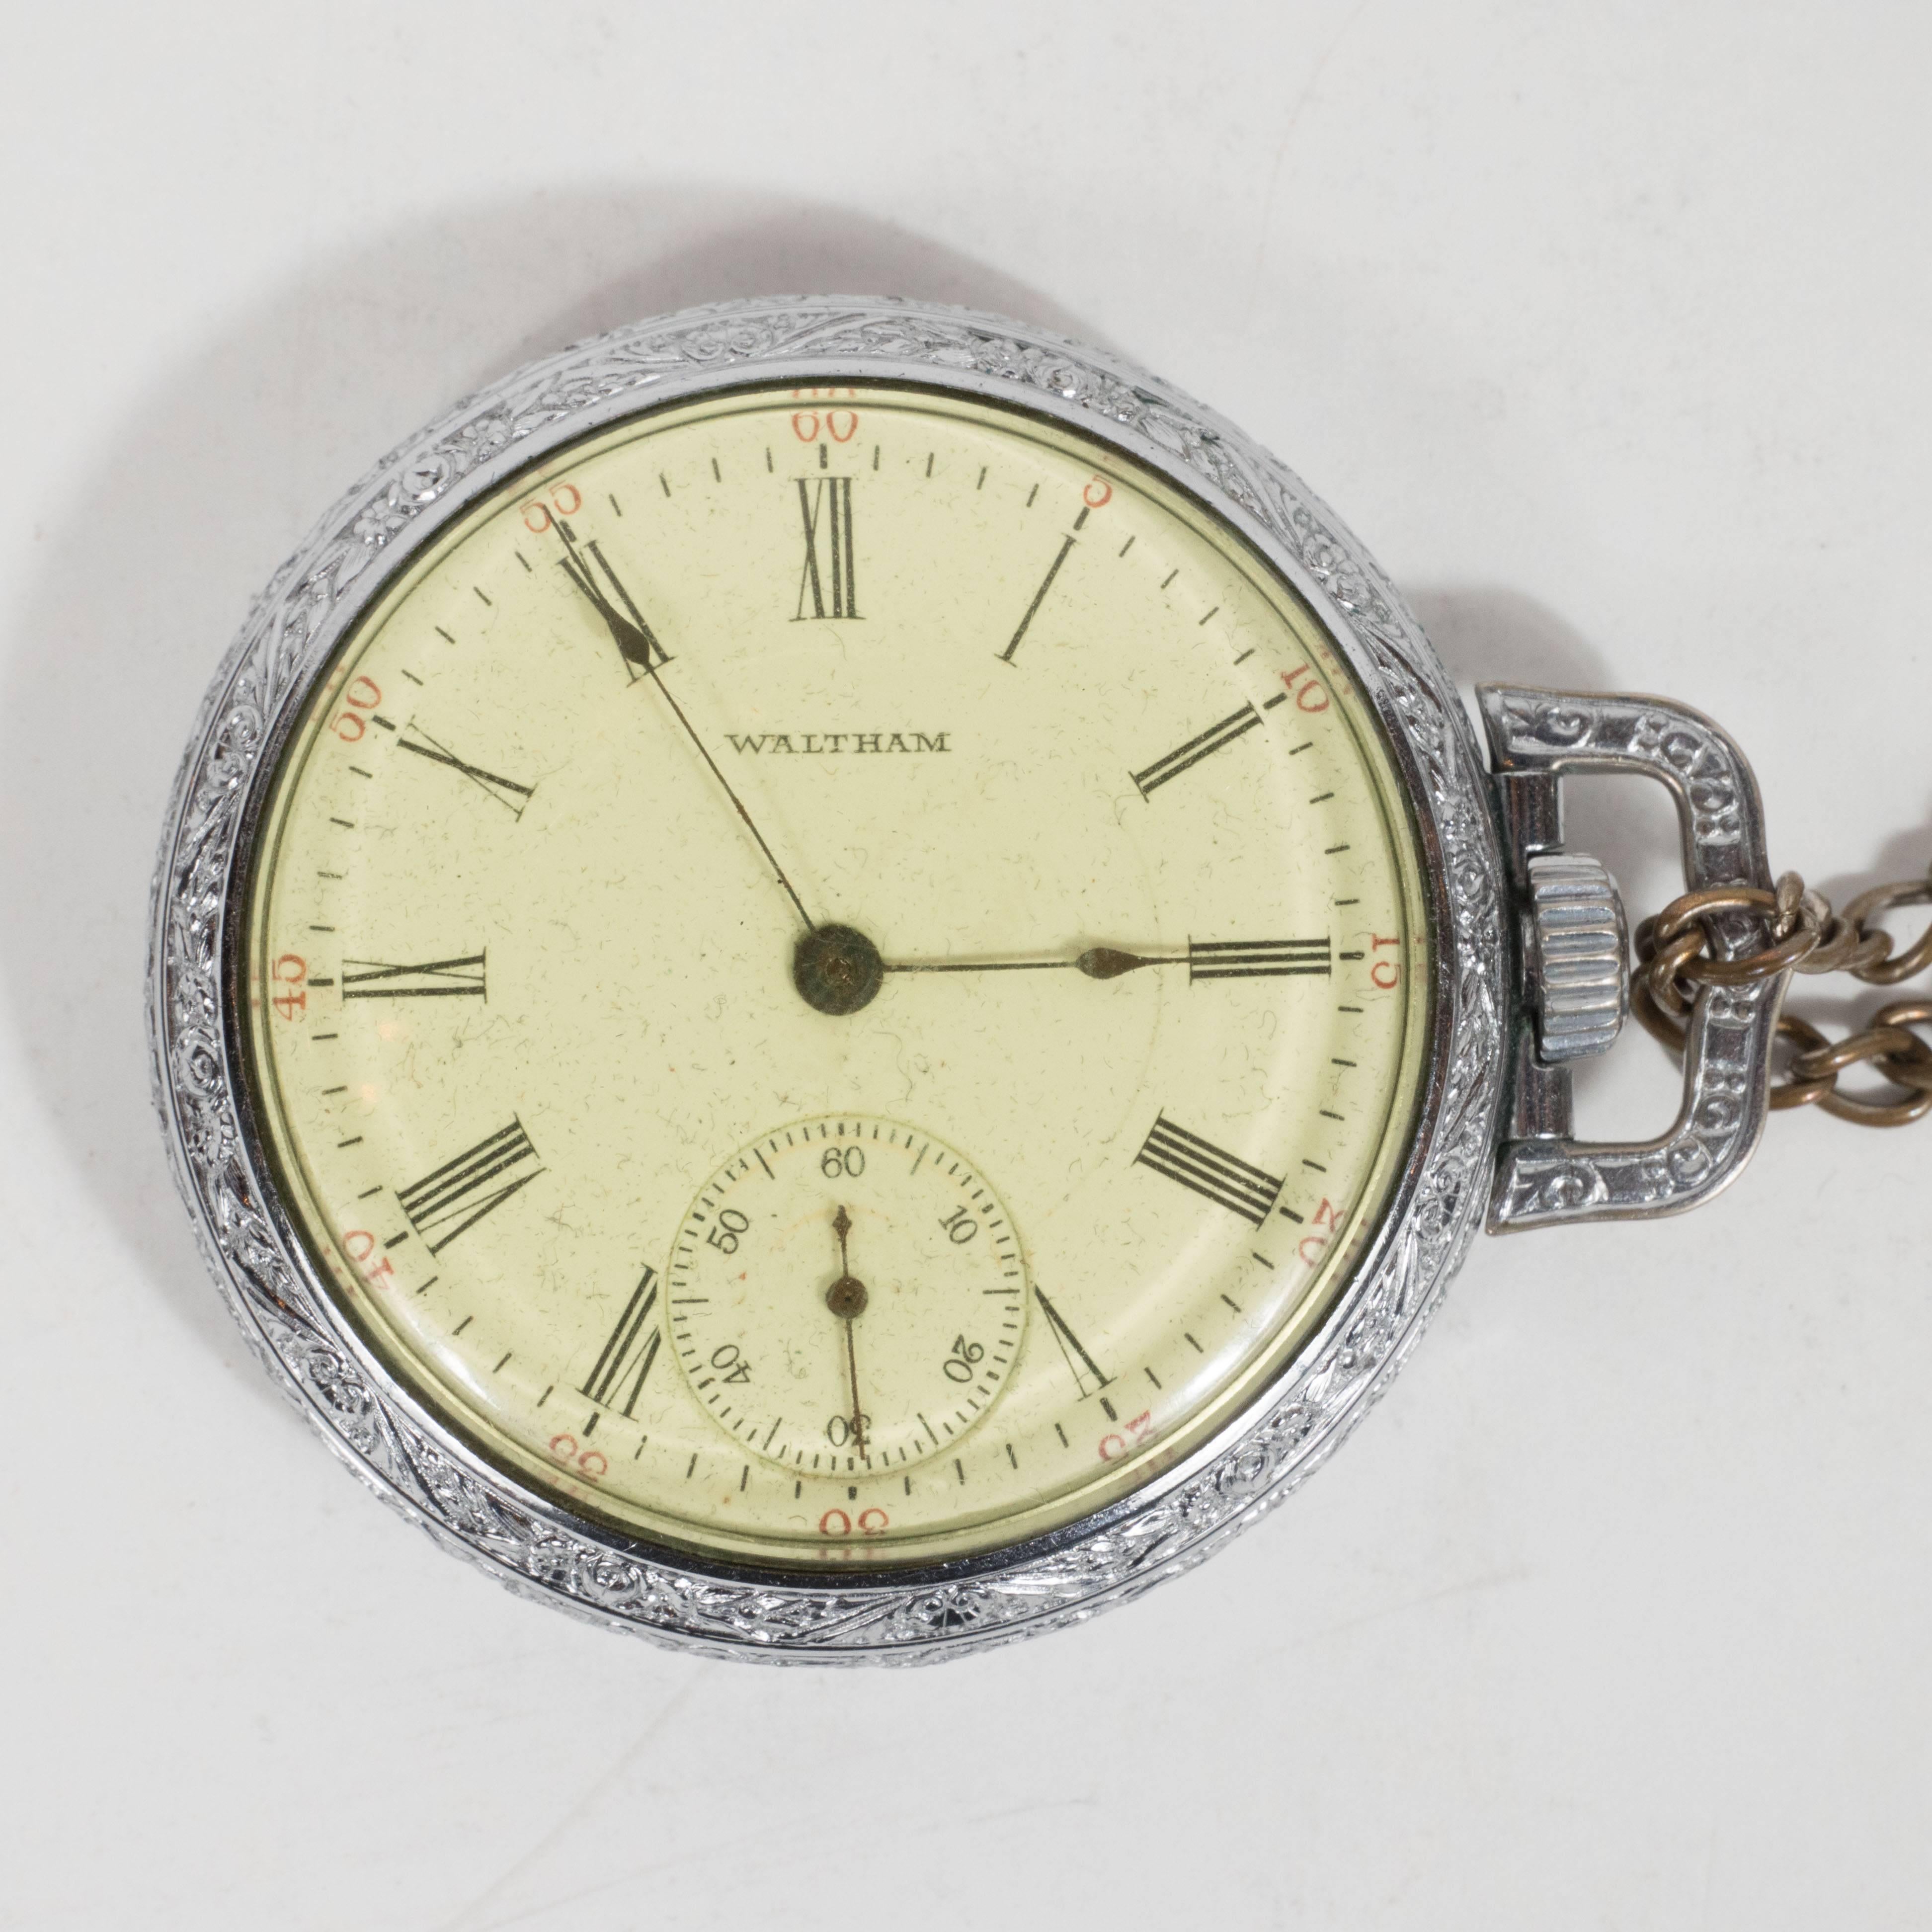 This classic chronometer pocket watch features delicate reed shaped hour and minutes hands on the main dial, roman numerals, and an hour maker circumscribing the perimeter of the face in a ruby red Art Deco font. "Waltham," the